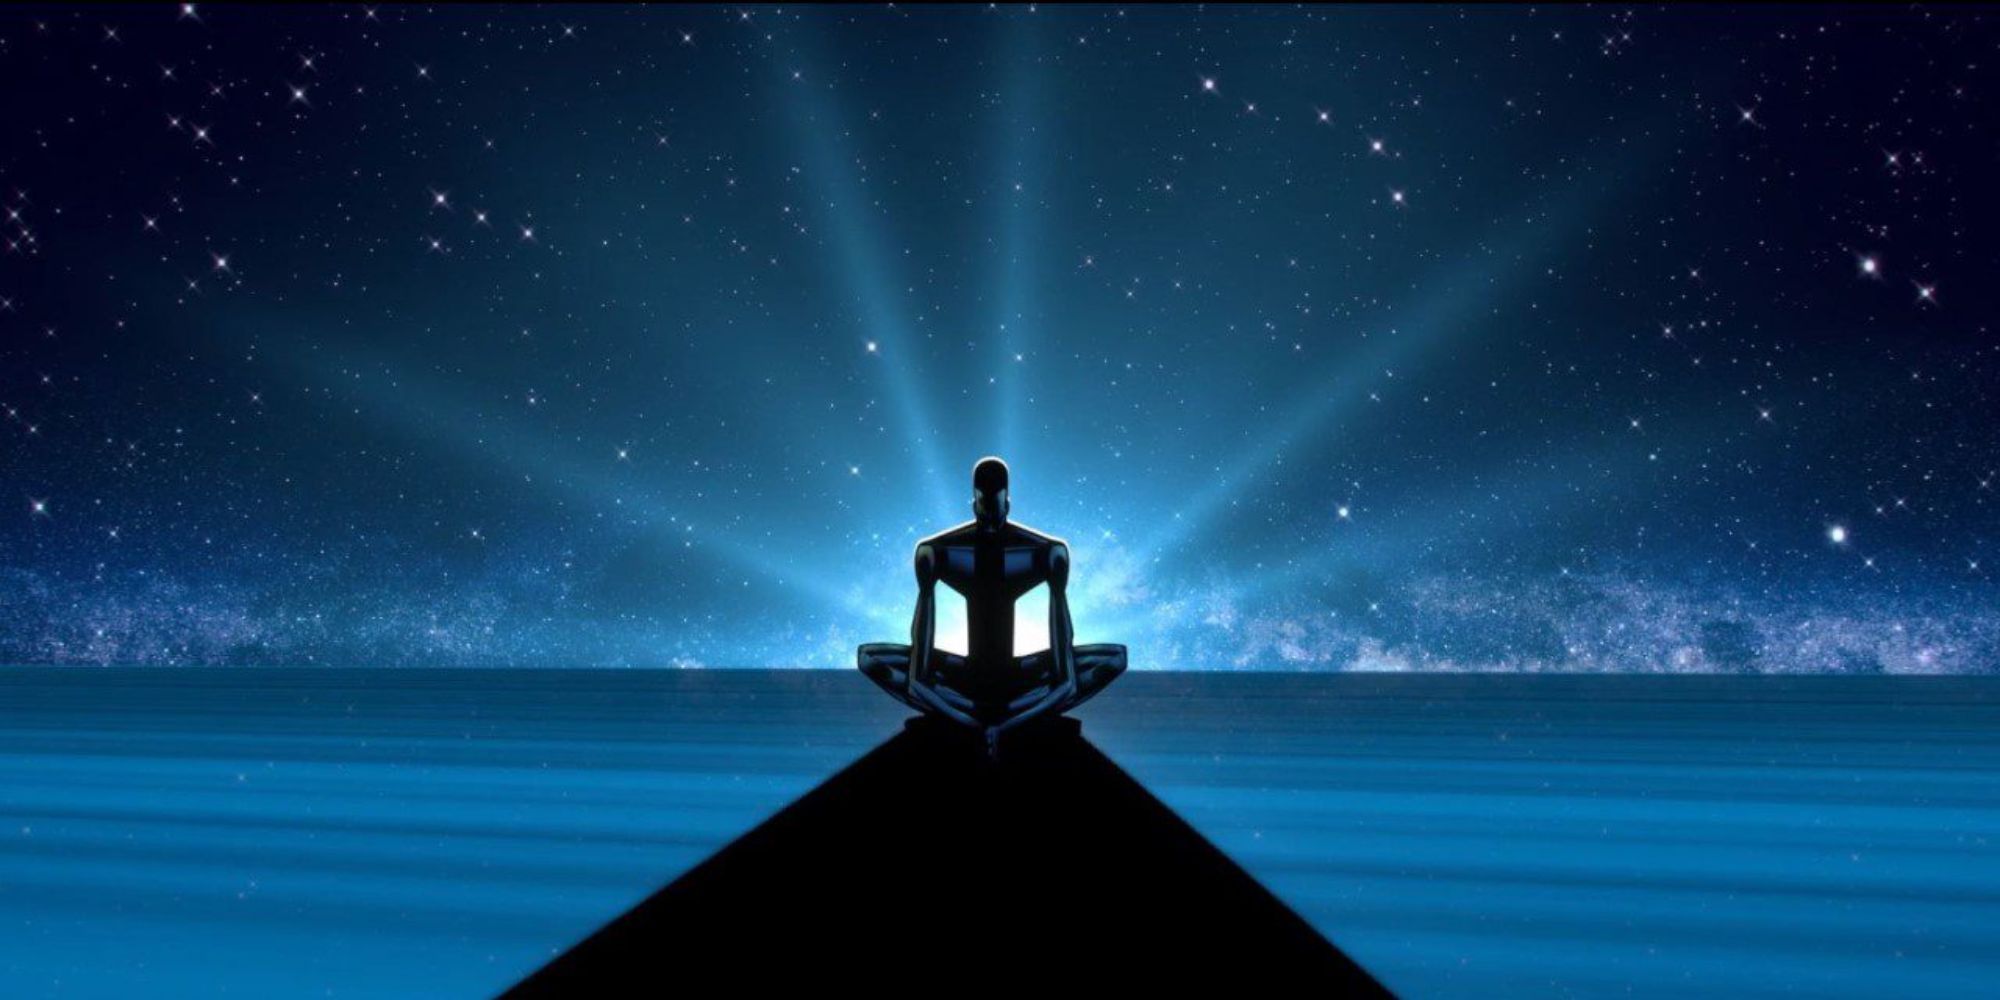 A man meditating in a blue cosmo light